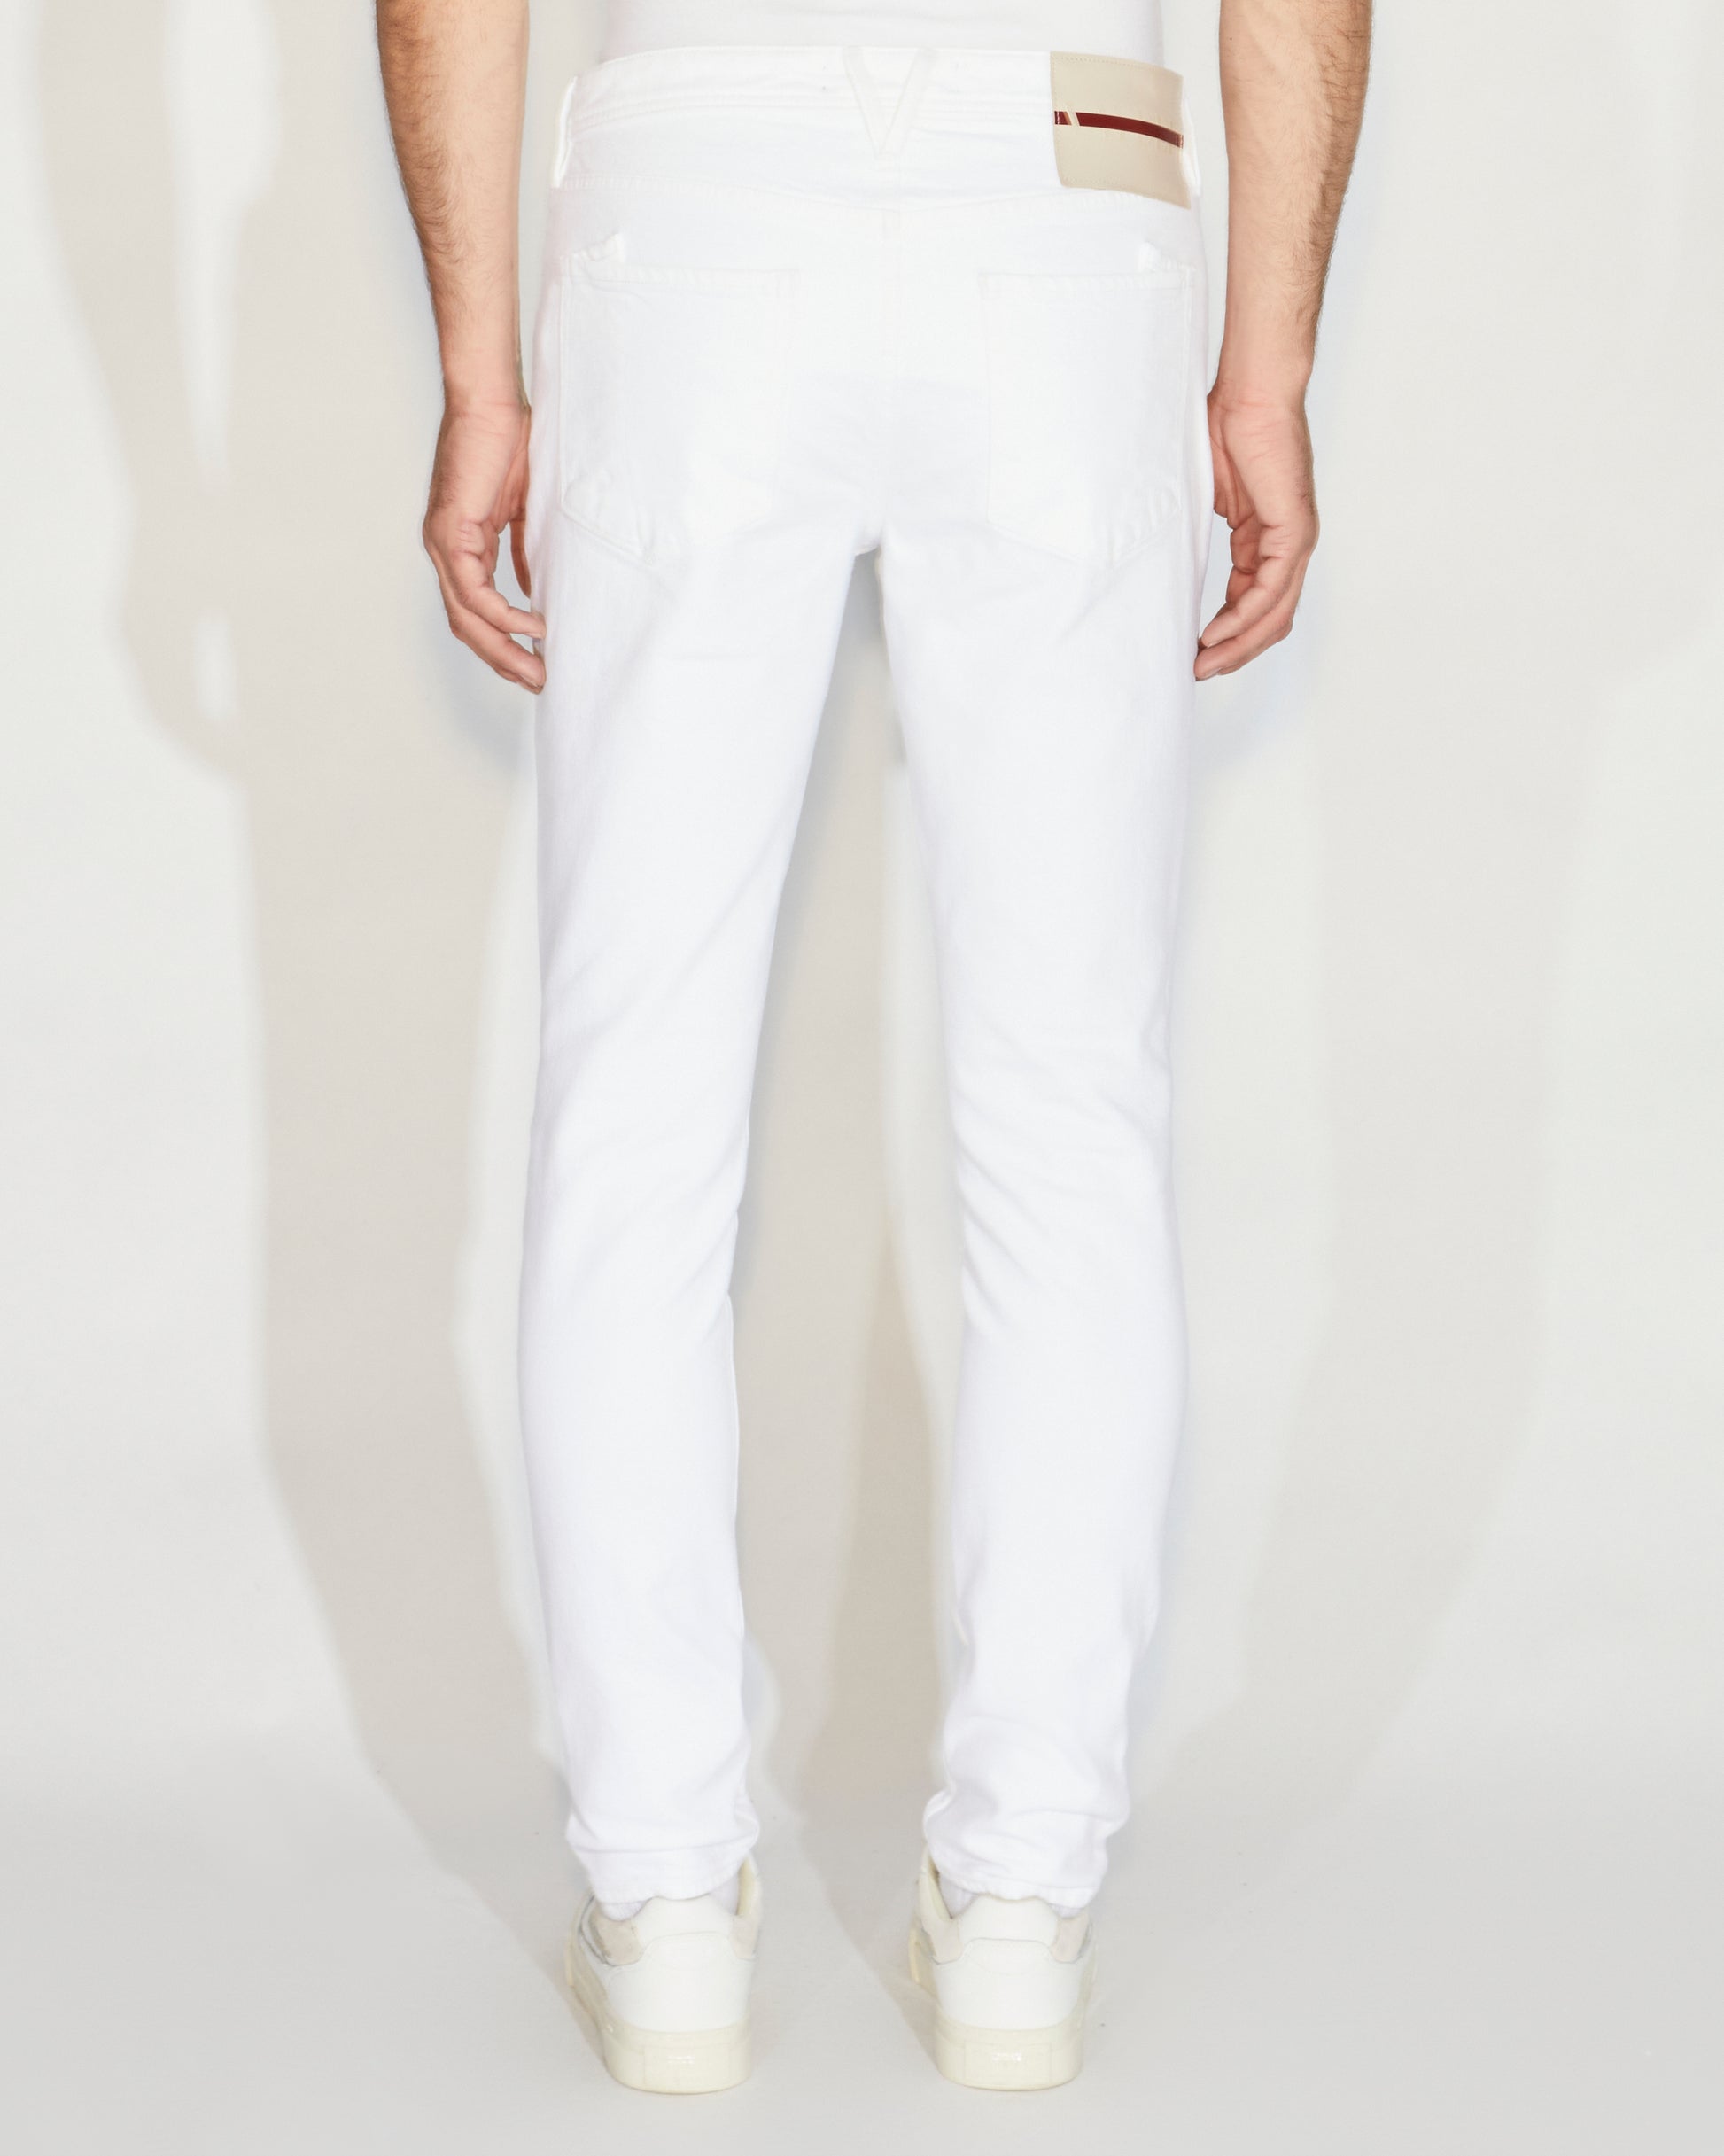 Man standing wearing white denim, a white tee and white shoes